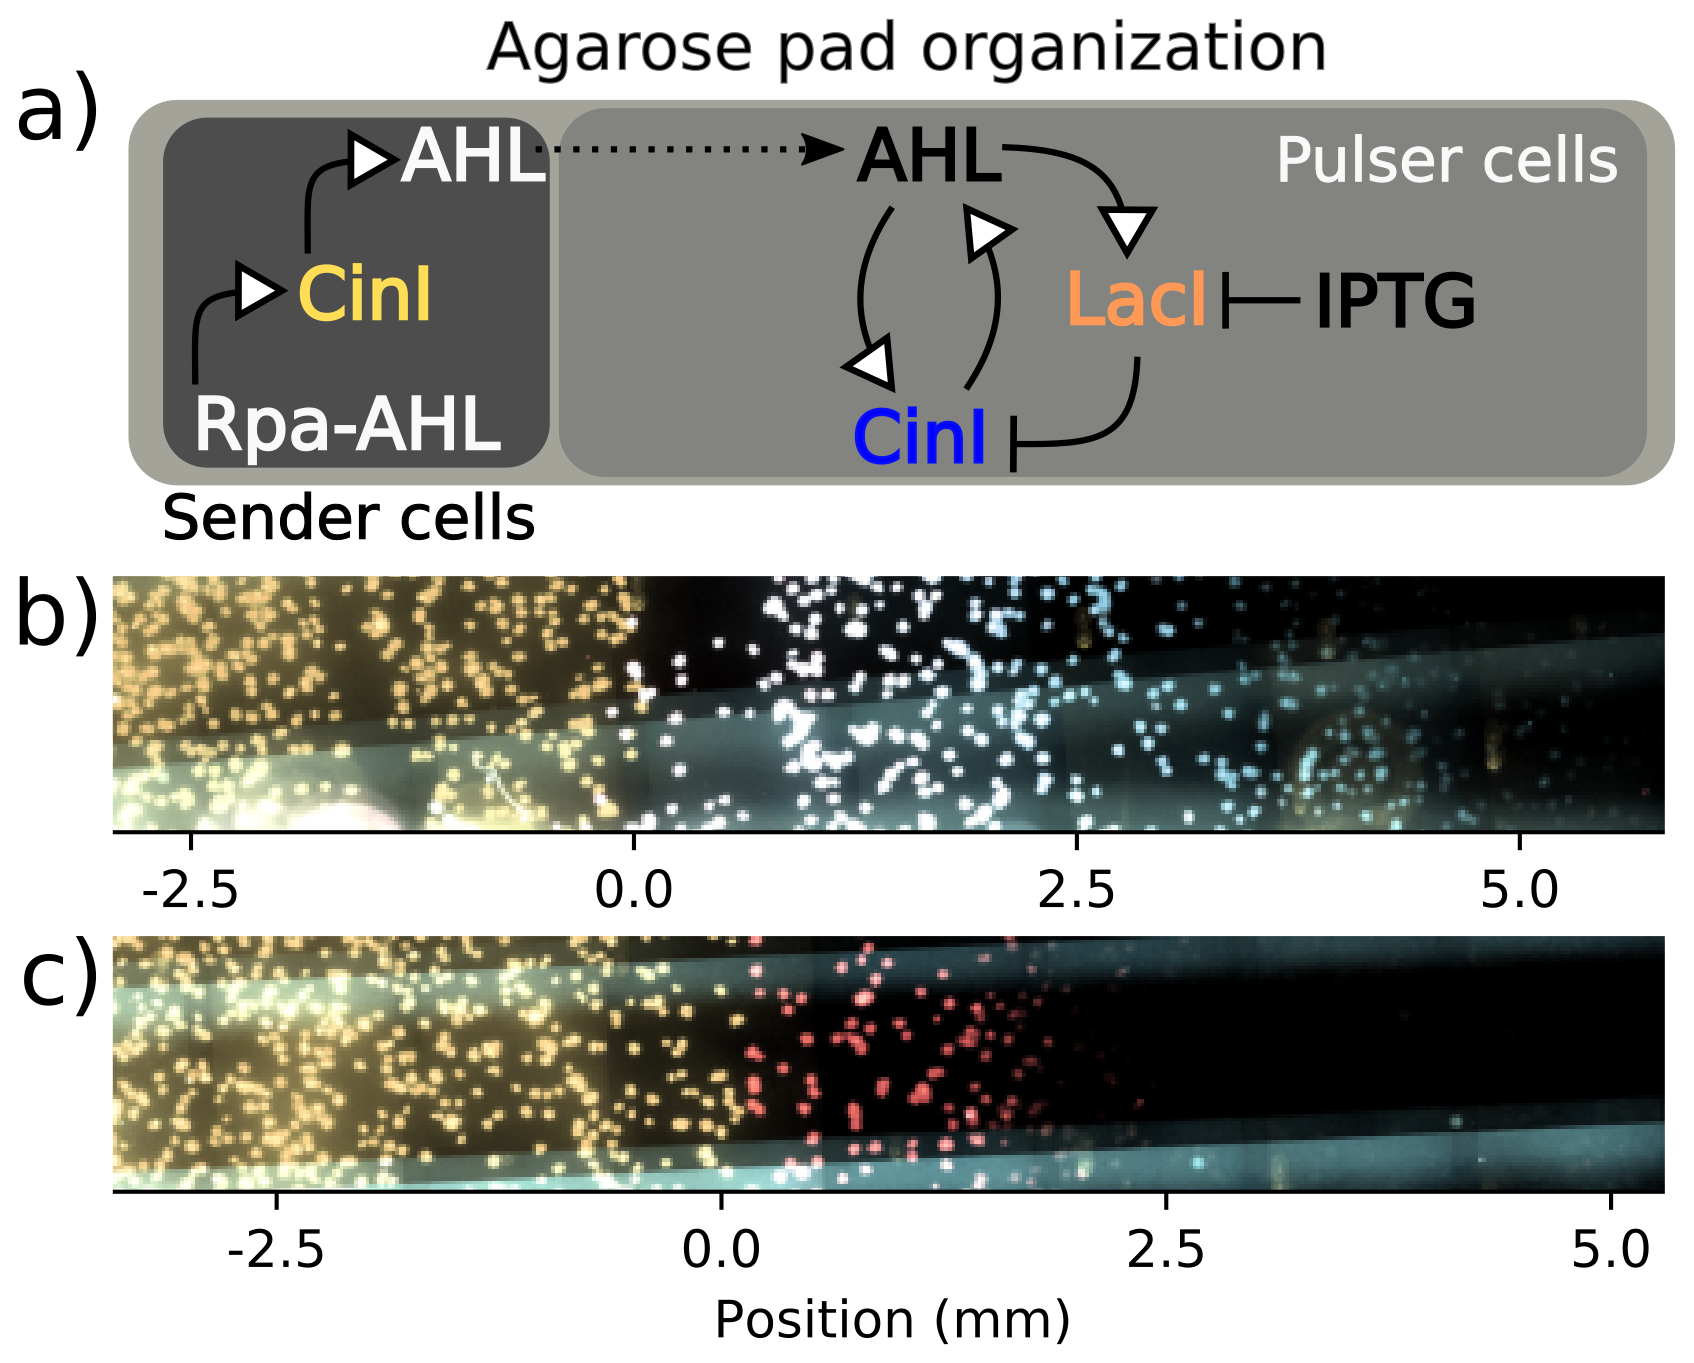 Schematic (a) summarizes the experimental setup described in the text, with shaded regions corresponding to the portions of the agar pad occupied by the sender and pulser cell strains. This subfigure also depicts abbreviated transcriptional networks of the sender and pulser strains. Subfigure (b) includes an image from a time-lapse microscopy experiment of a sender-amplifier consortium. Subfigures (b-c) are fluorescence micrographs where yellow indicates sender activity, red indicates repressor activity, and blue indicates synthase activity. Subfigure (c) is a sender-receiver consortium from the same experiment imaged at the same time, 4 hours after pad inoculation. These images show the initiation of cell-cell communication, when sender cells have secreted sufficient AHL to elicit a response from their consortium partners. Amplifier cells fluoresce in both SCFP3A and mScarlet-I channels, which can appear white in the composite image. Position values are relative to the interior end of the sender population.